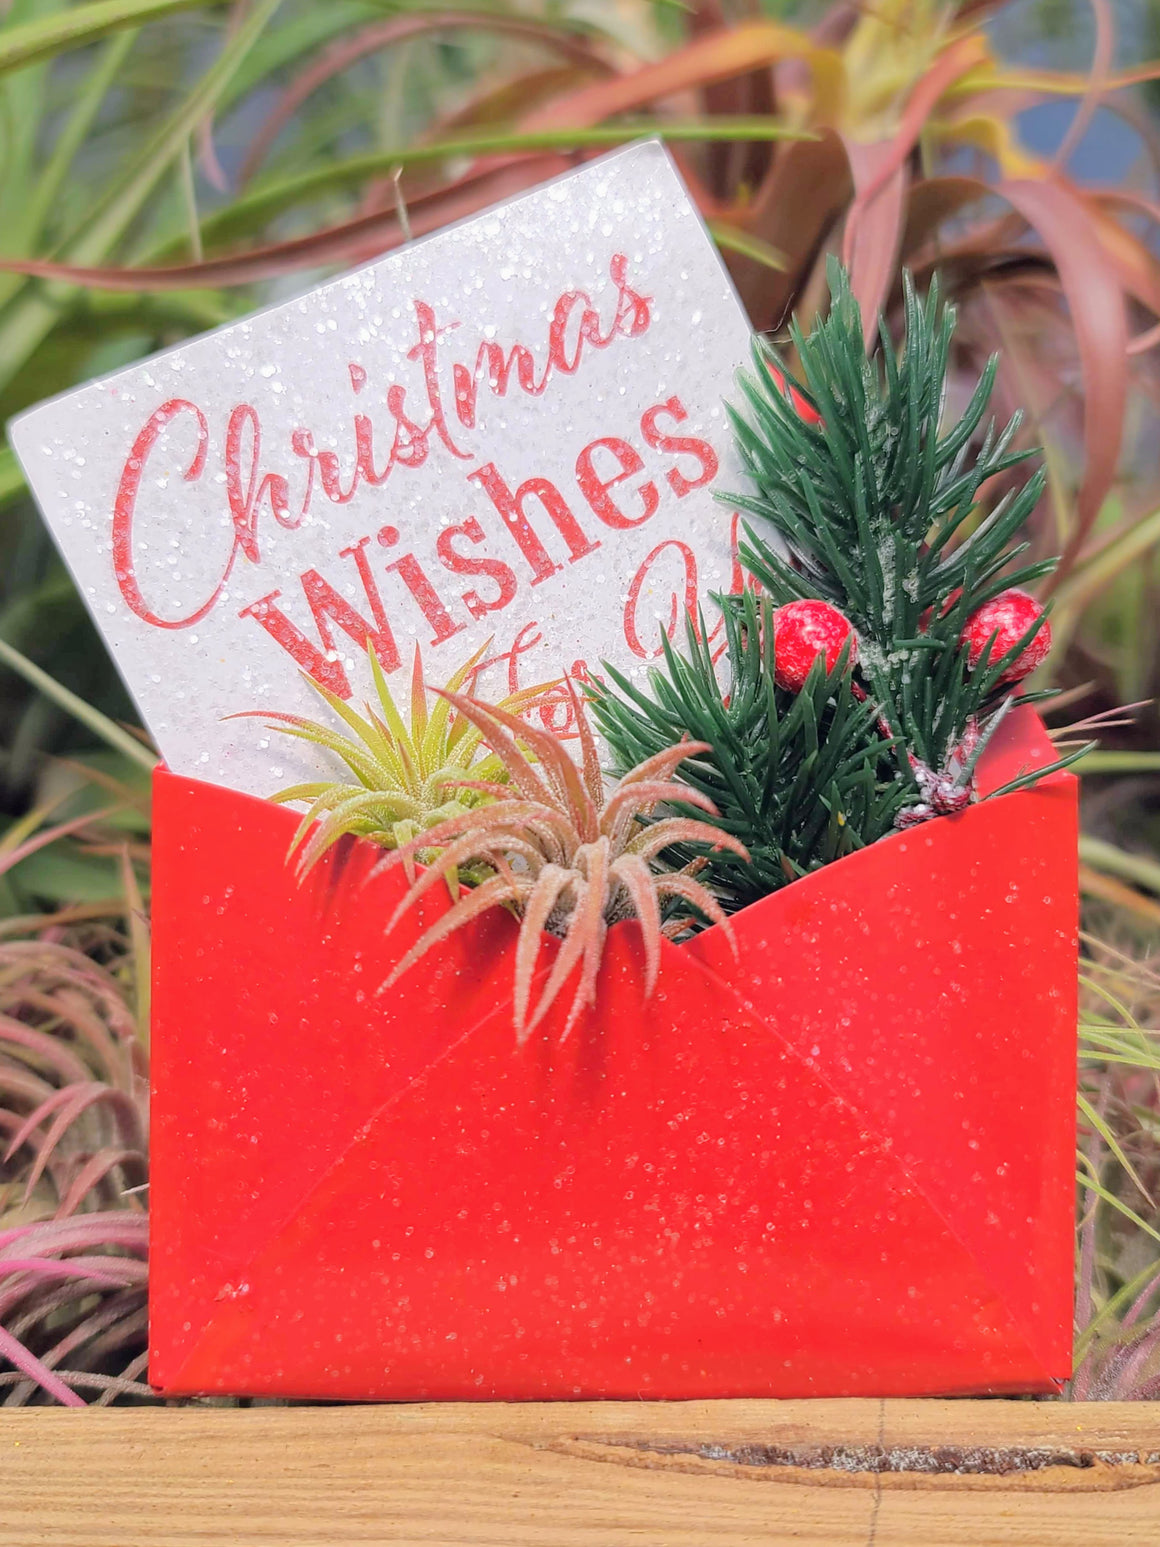 Christmas Card Air Plant Holder with Two Ionantha Mexicans